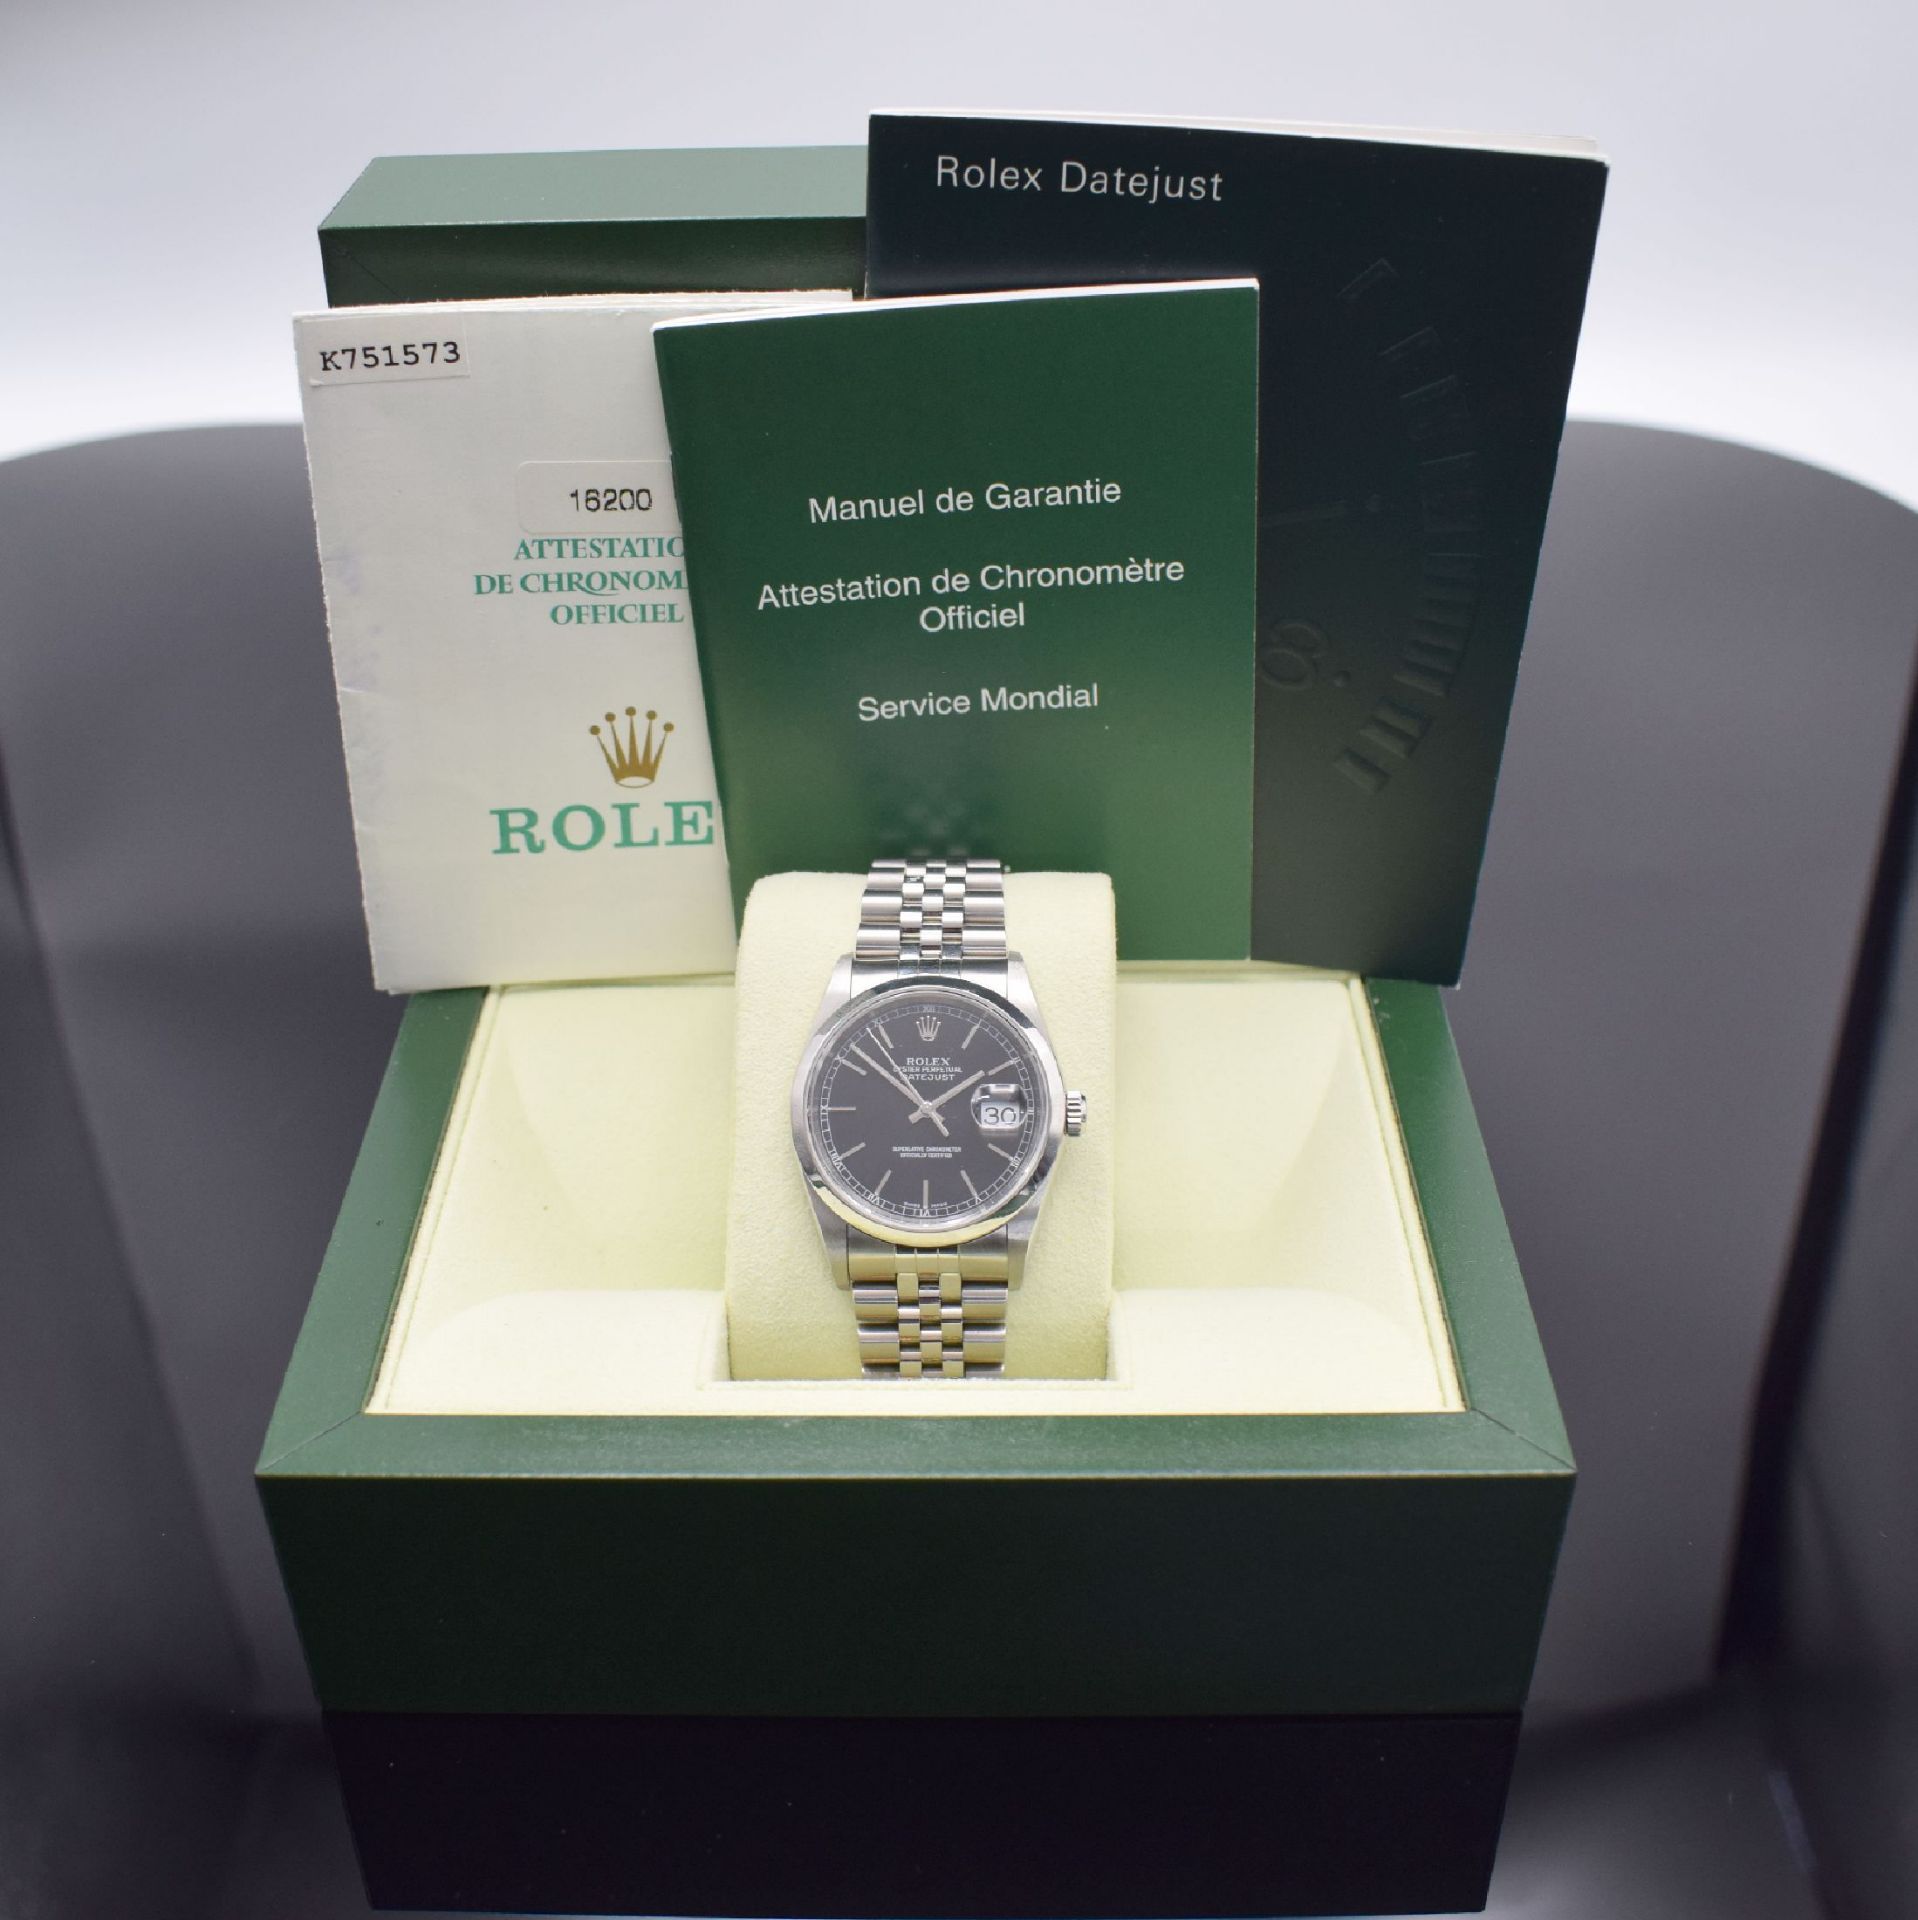 ROLEX Armbanduhr Oyster Perpetual Datejust Referenz 16200, - Image 6 of 6